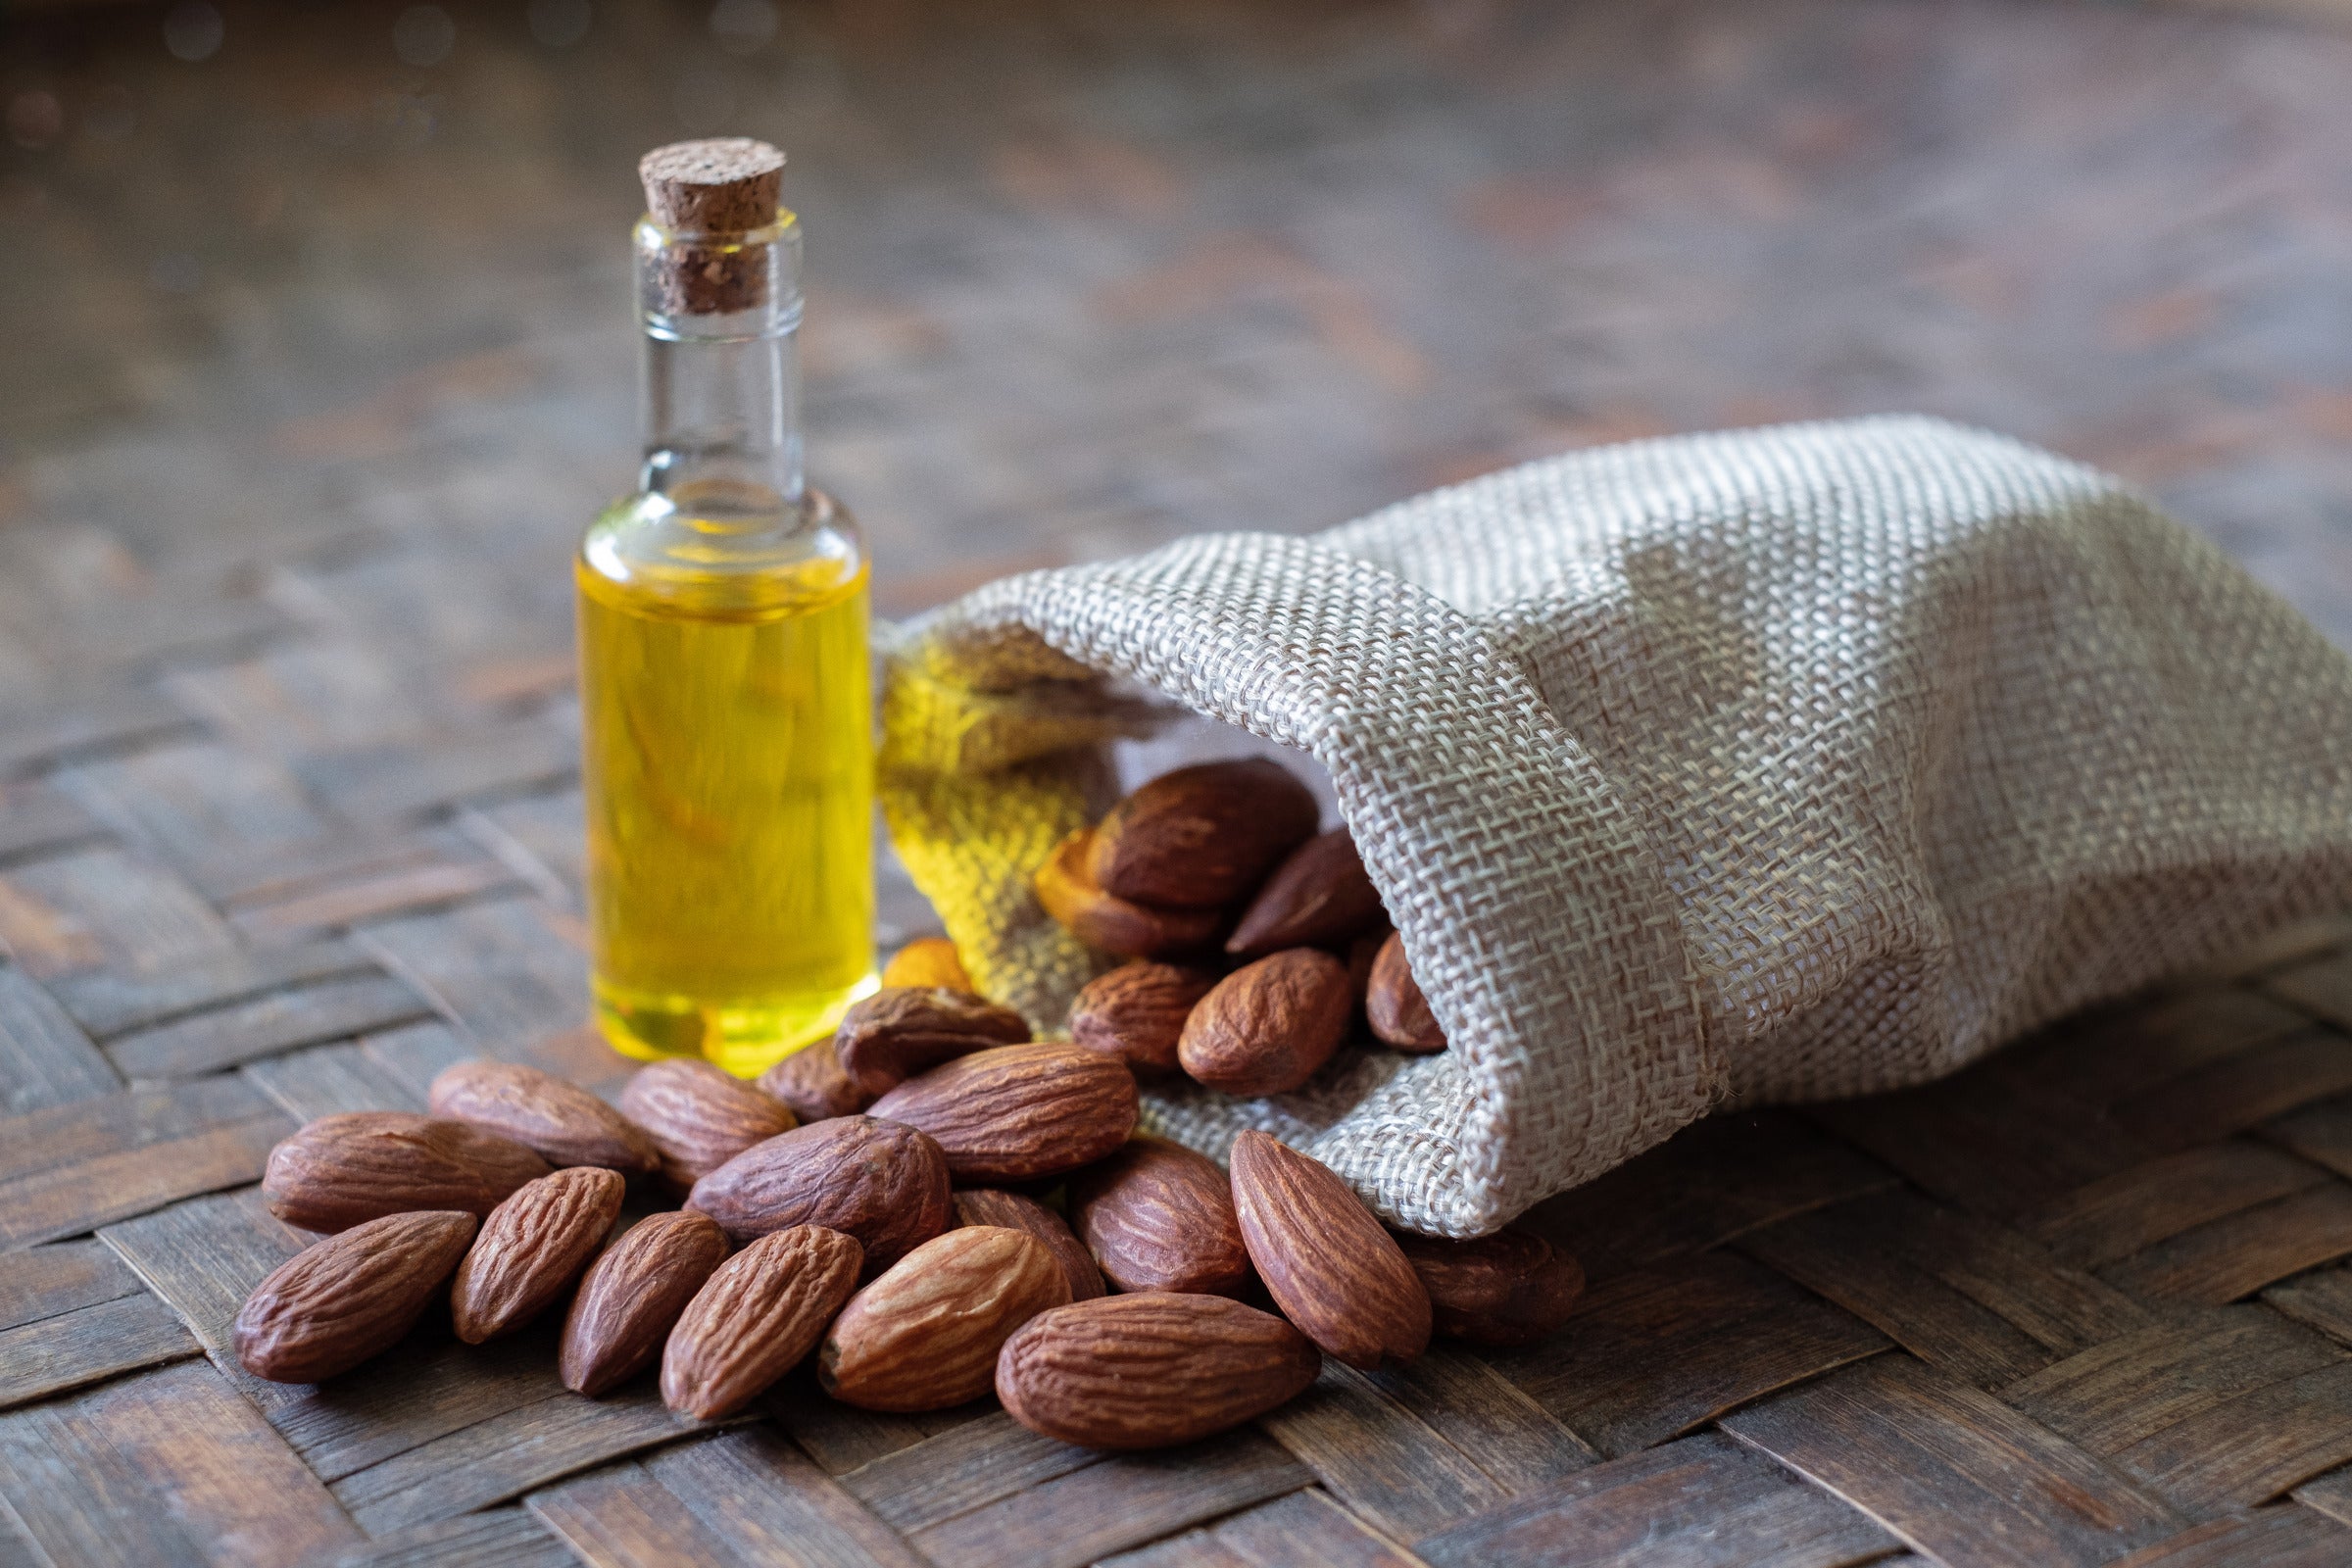 Massage Almond Oil on the Face to Tighten Sagging Skin